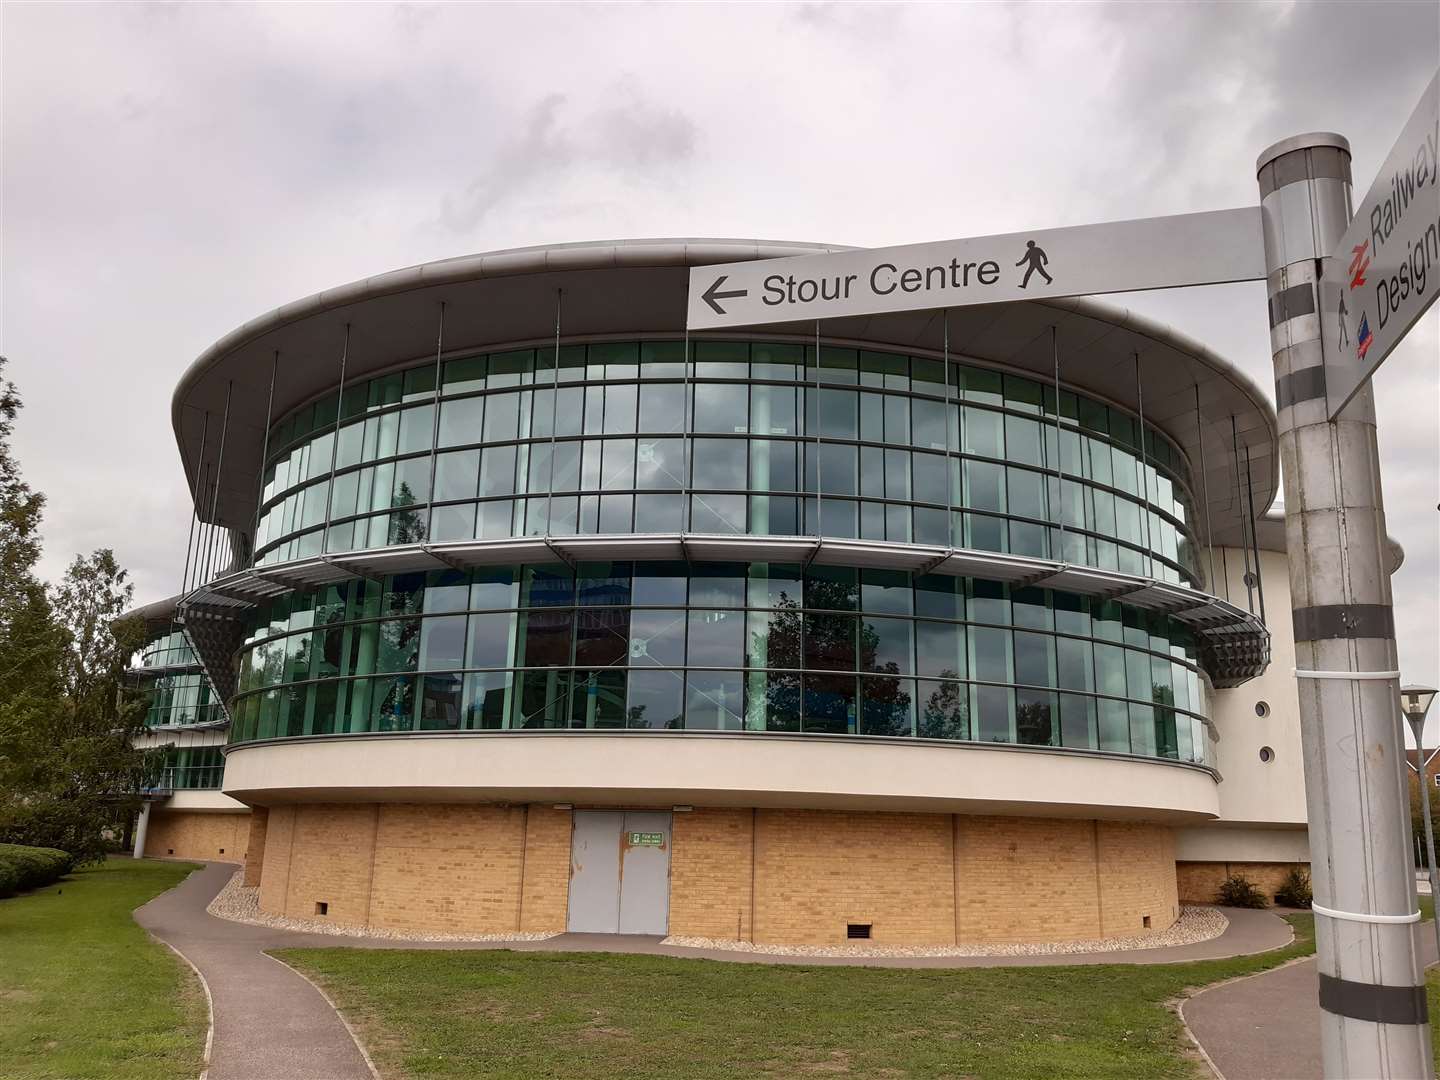 Ashford Stour Centre Cafe has received a one-star food hygiene rating